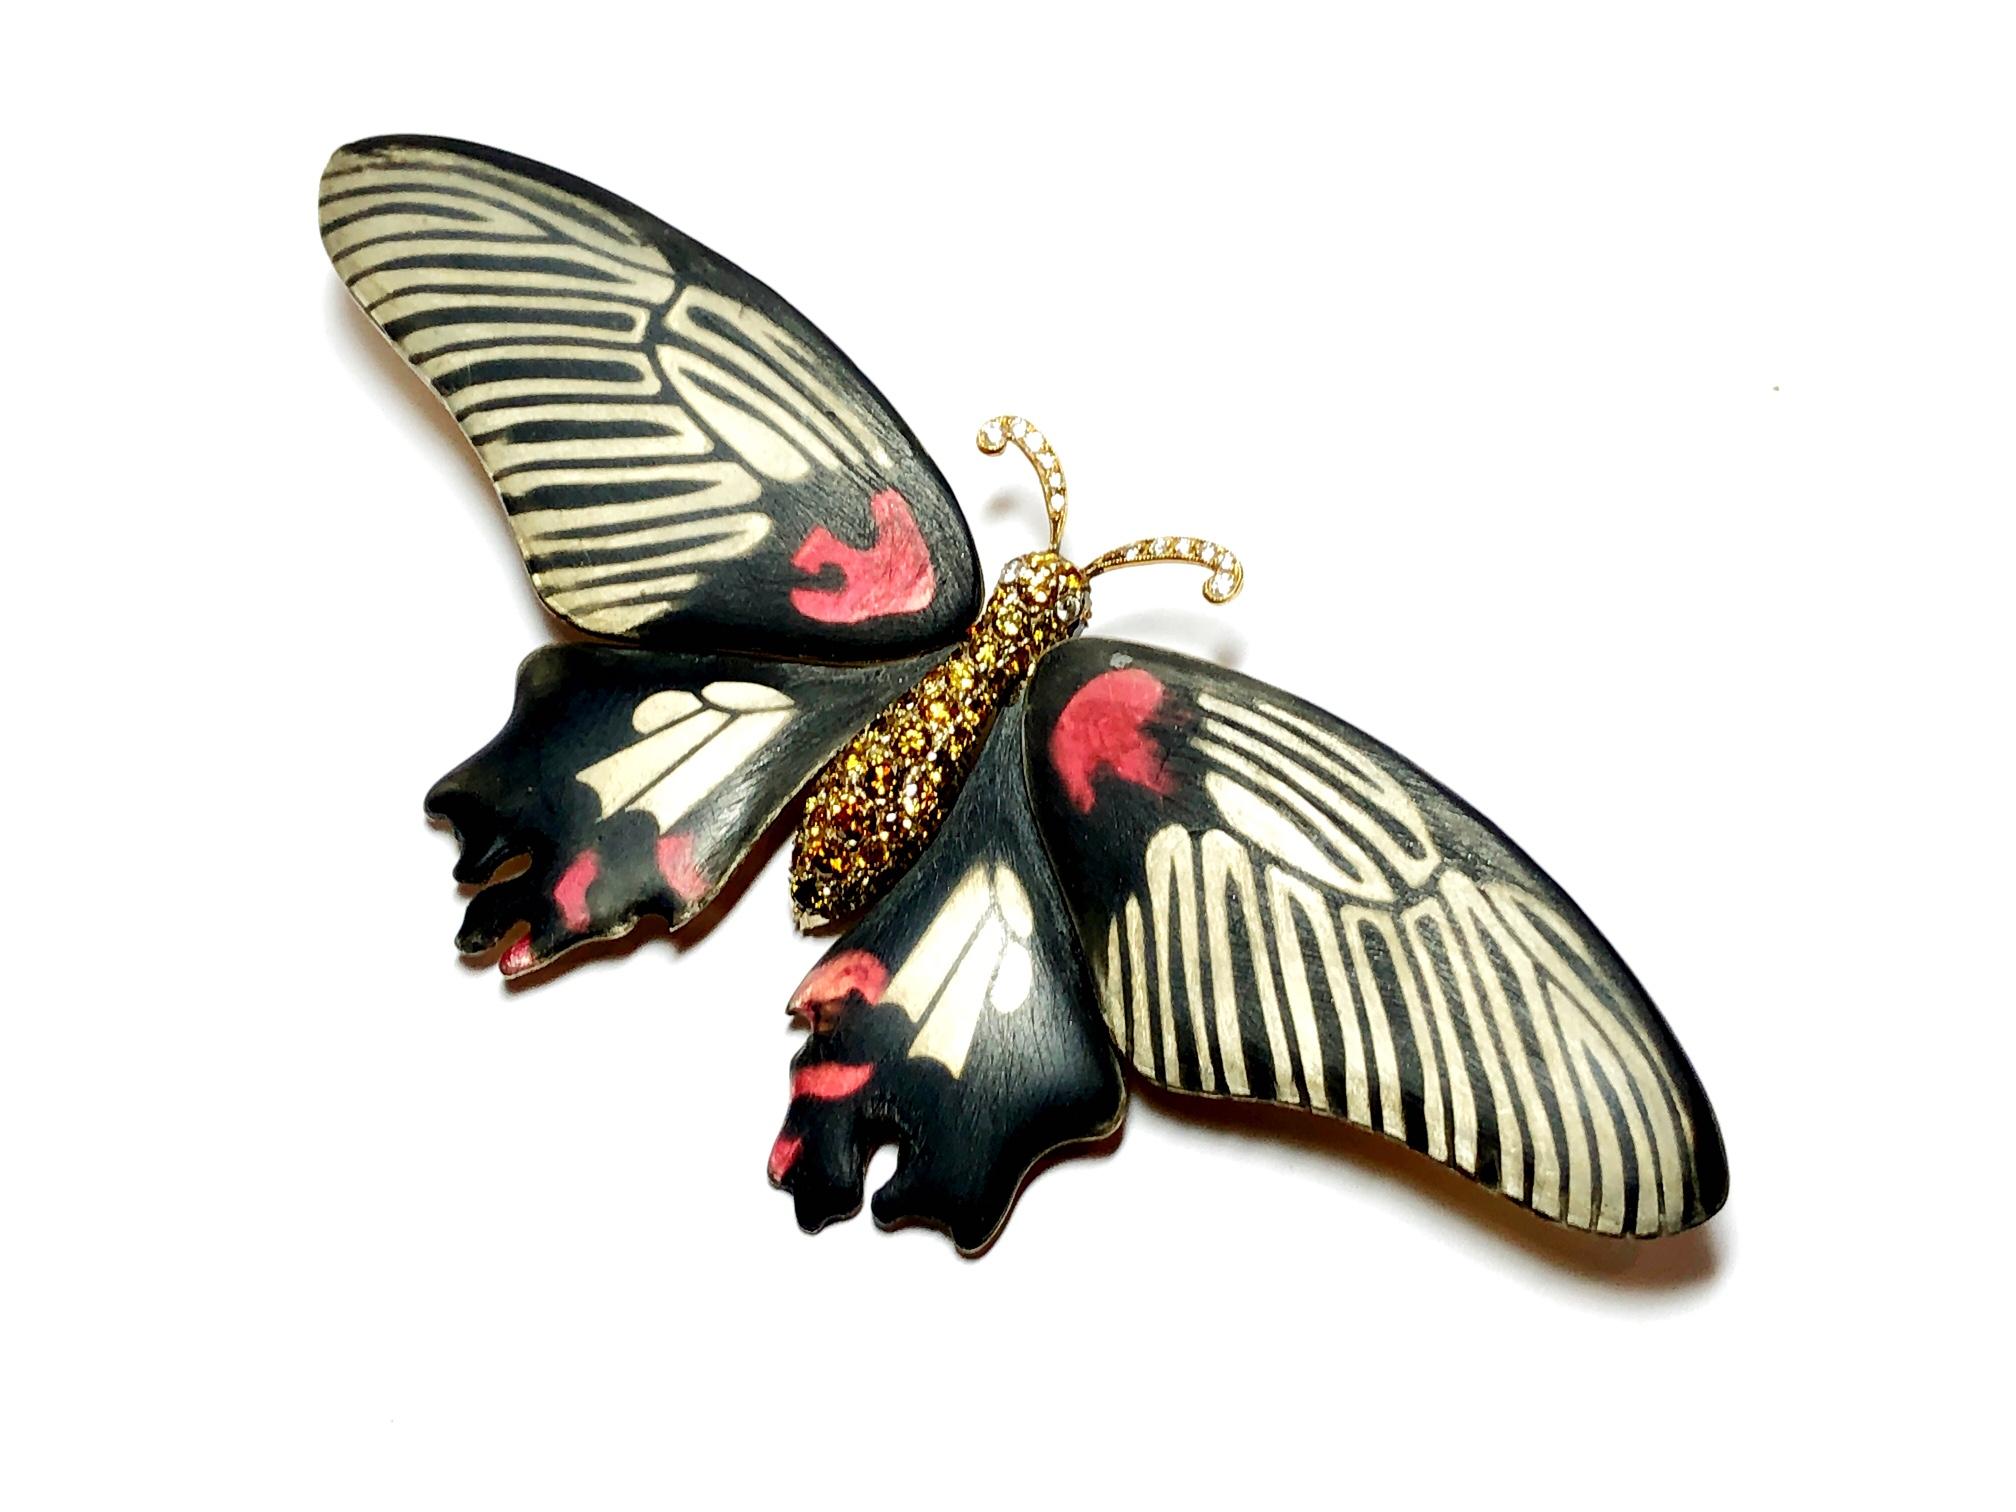 A scarlet mormon butterfly brooch, with round brilliant-cut diamond set eyes and antennae, with a yellow and brown diamond pavé set body and silver, black and red enamel wings, mounted in silver-upon-gold. The total diamond weight is approximately